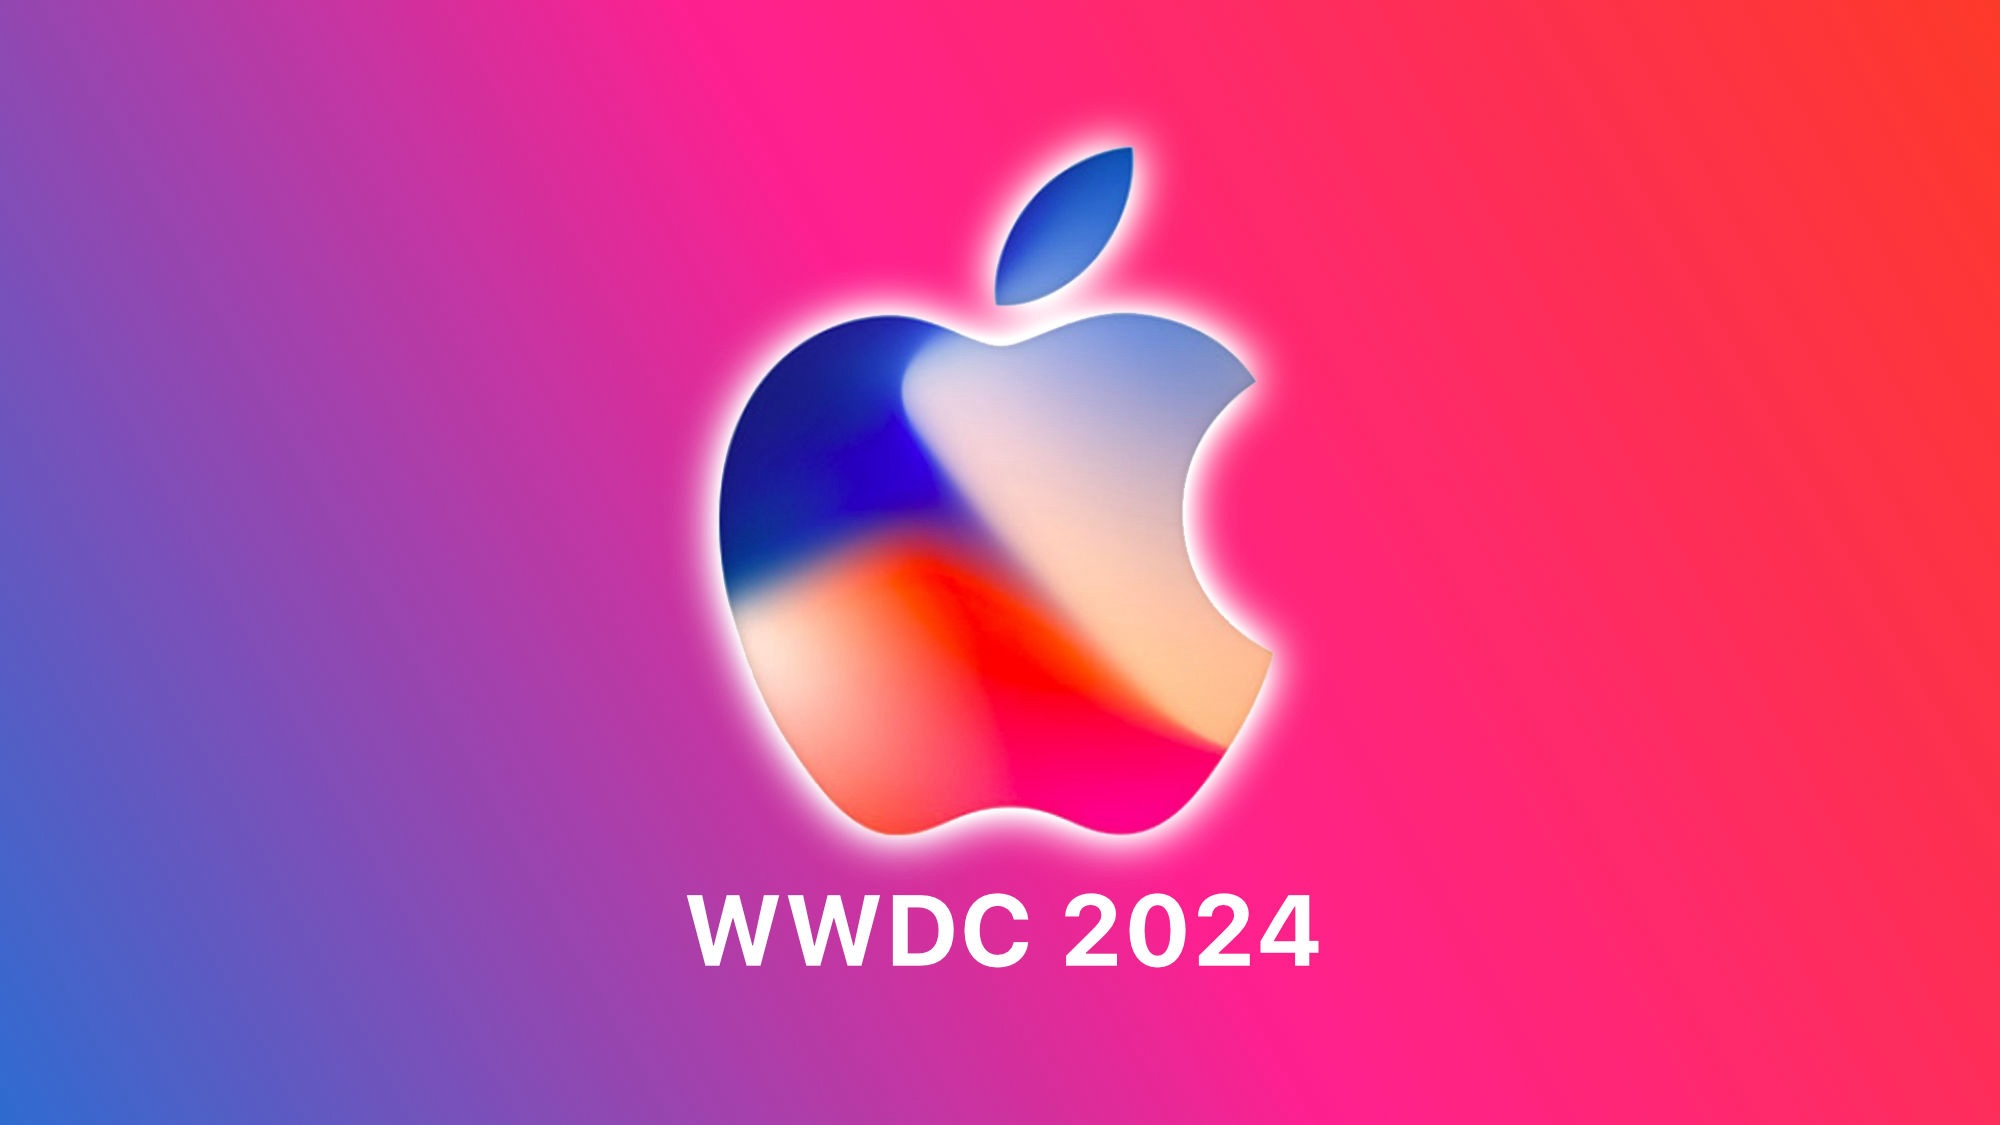 Apple WWDC 2024: when will the date be announced?